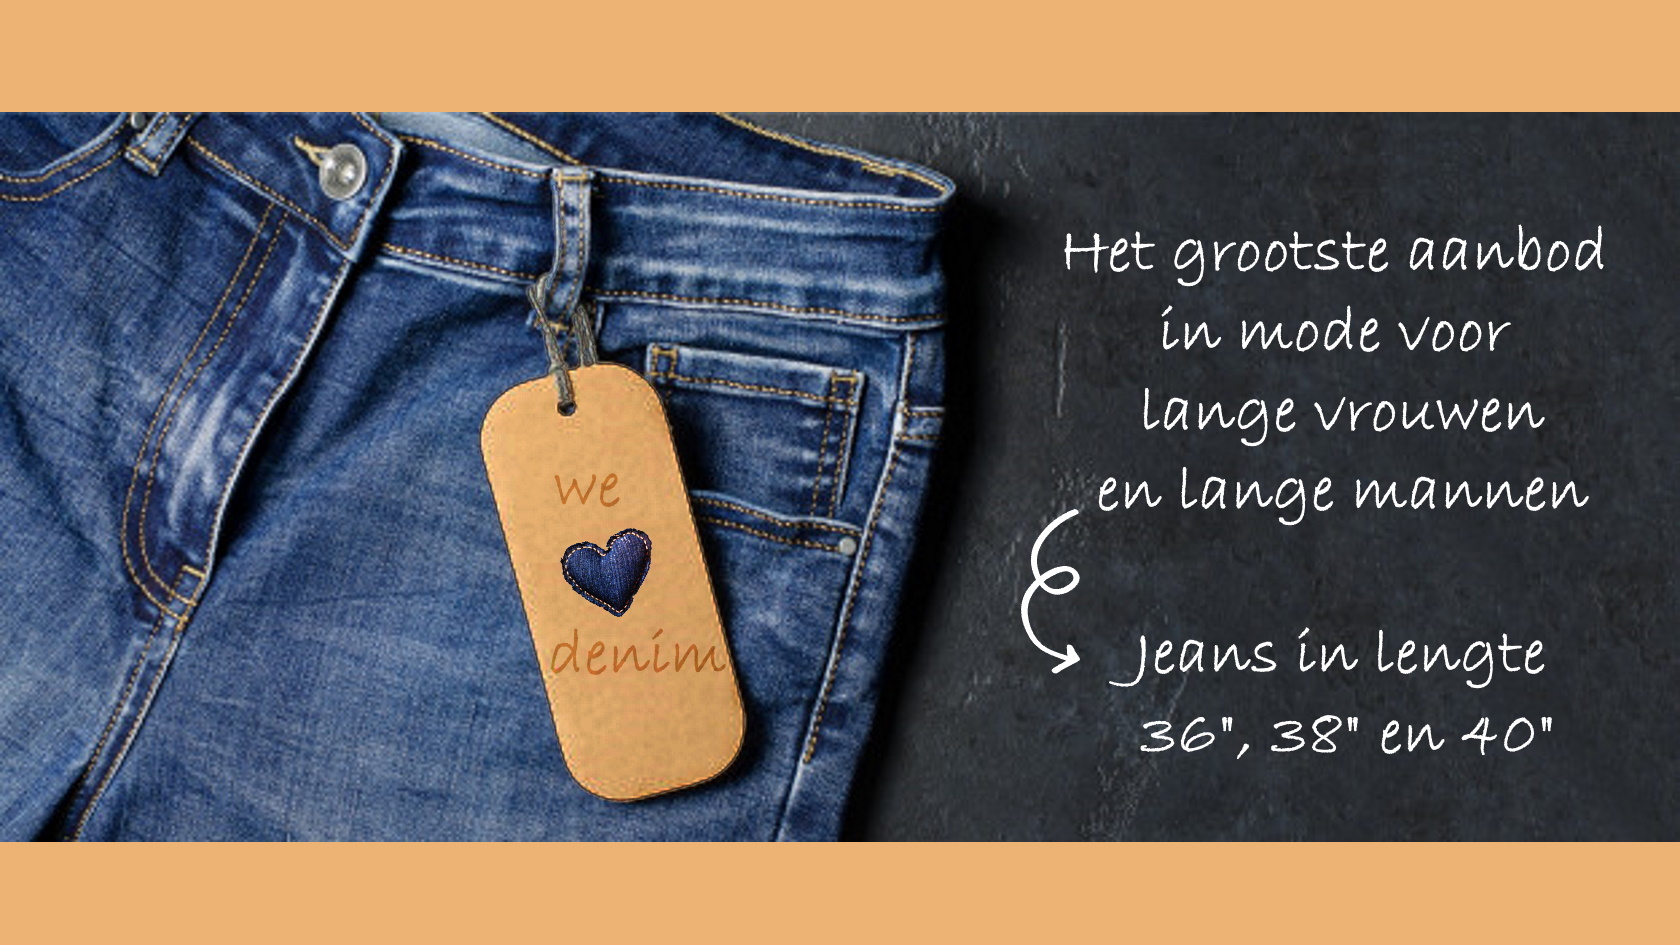 House of Tall kleding voor dames.